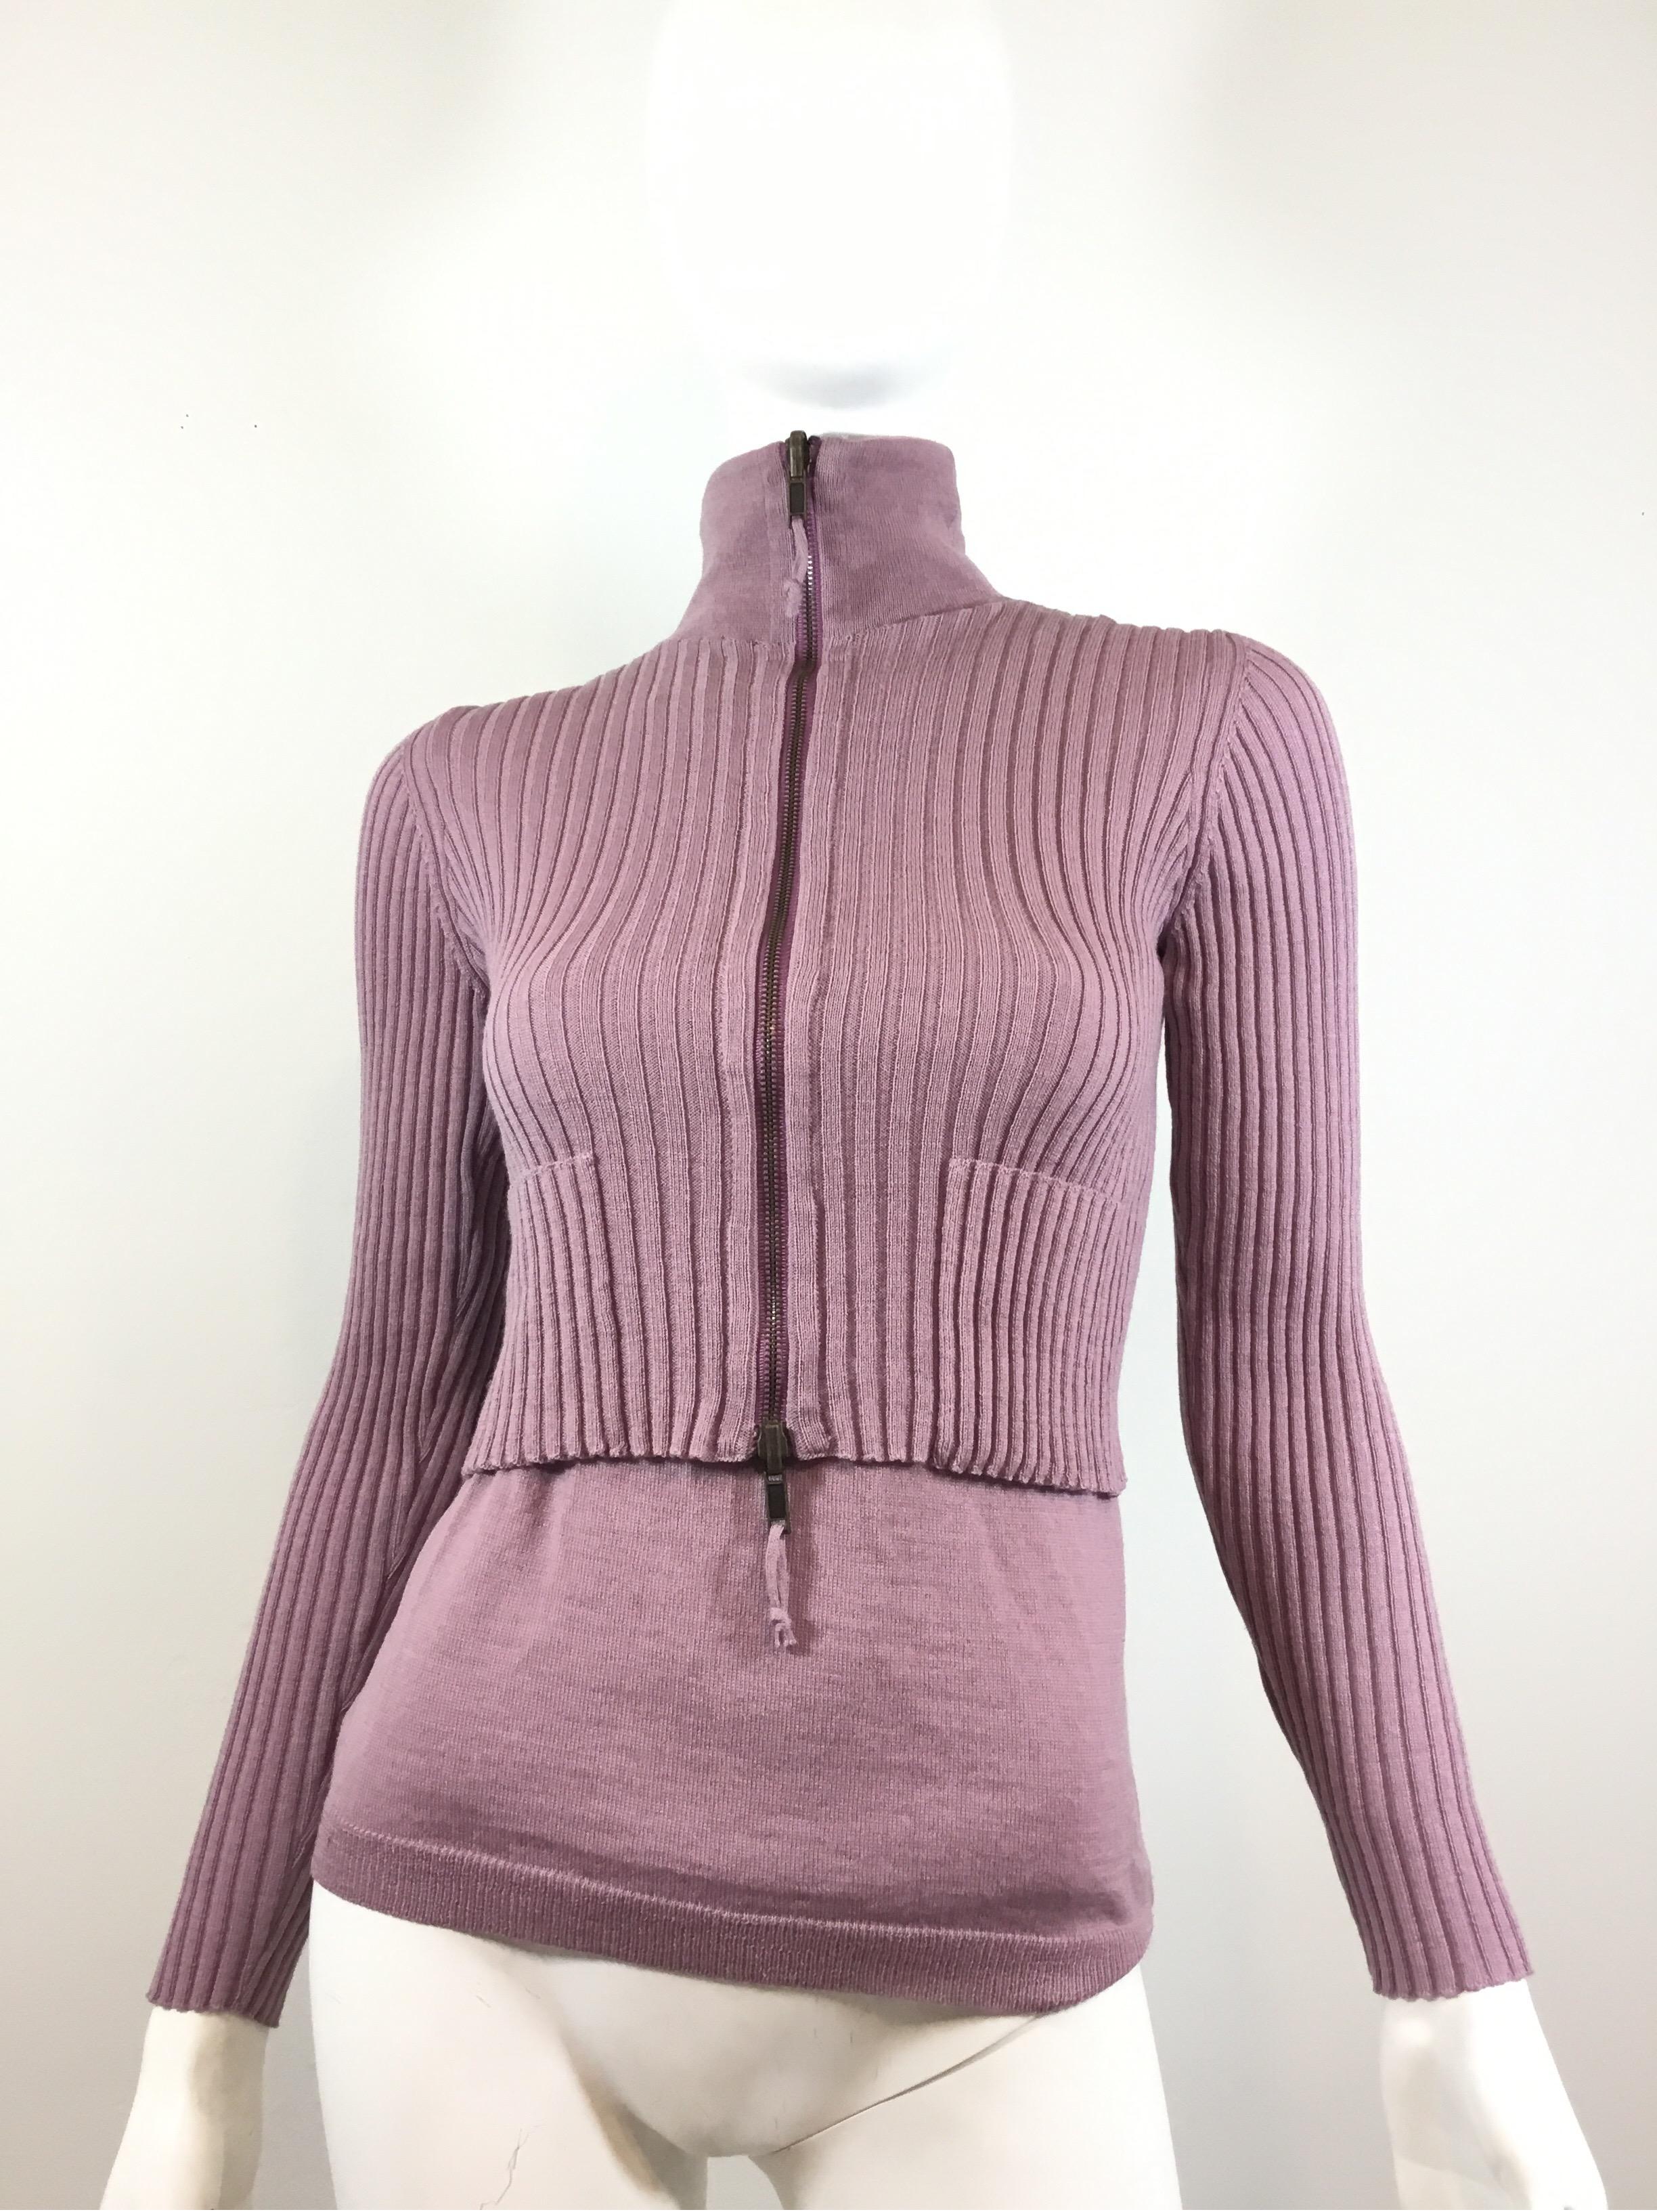 Jean Paul Gaultier sweater comes attached with a shell to, two front pockets, and a zipper fastening. Sweater is featured in a mauve purple color, labeled a size small, made in Italy, and composed of 100% wool.

Bust 29”+ (with room for stretch),